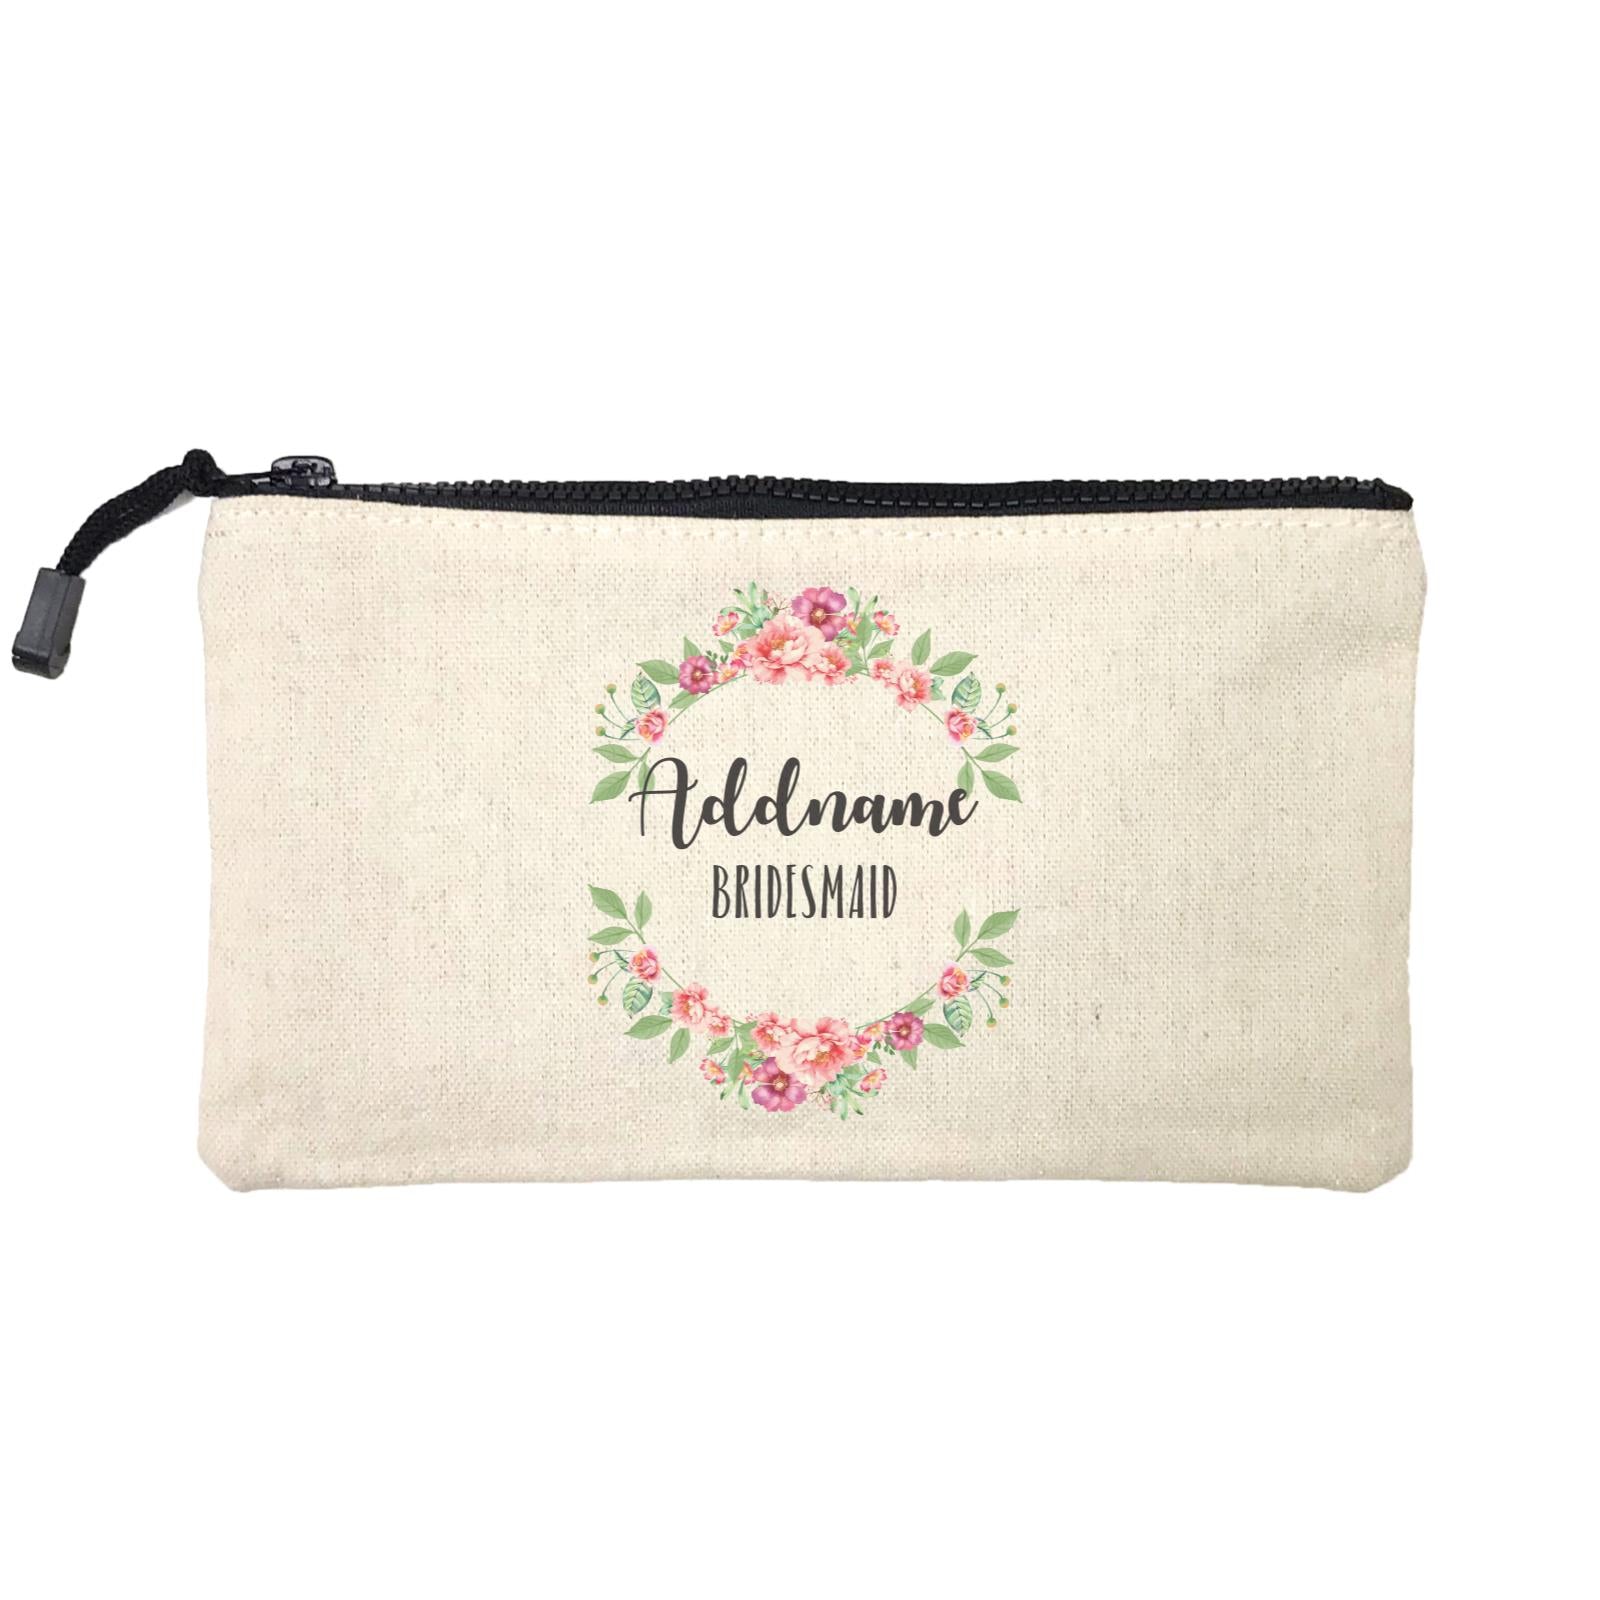 Bridesmaid Floral Sweet Coral Flower Wreath Bridesmaid Addname Mini Accessories Stationery Pouch